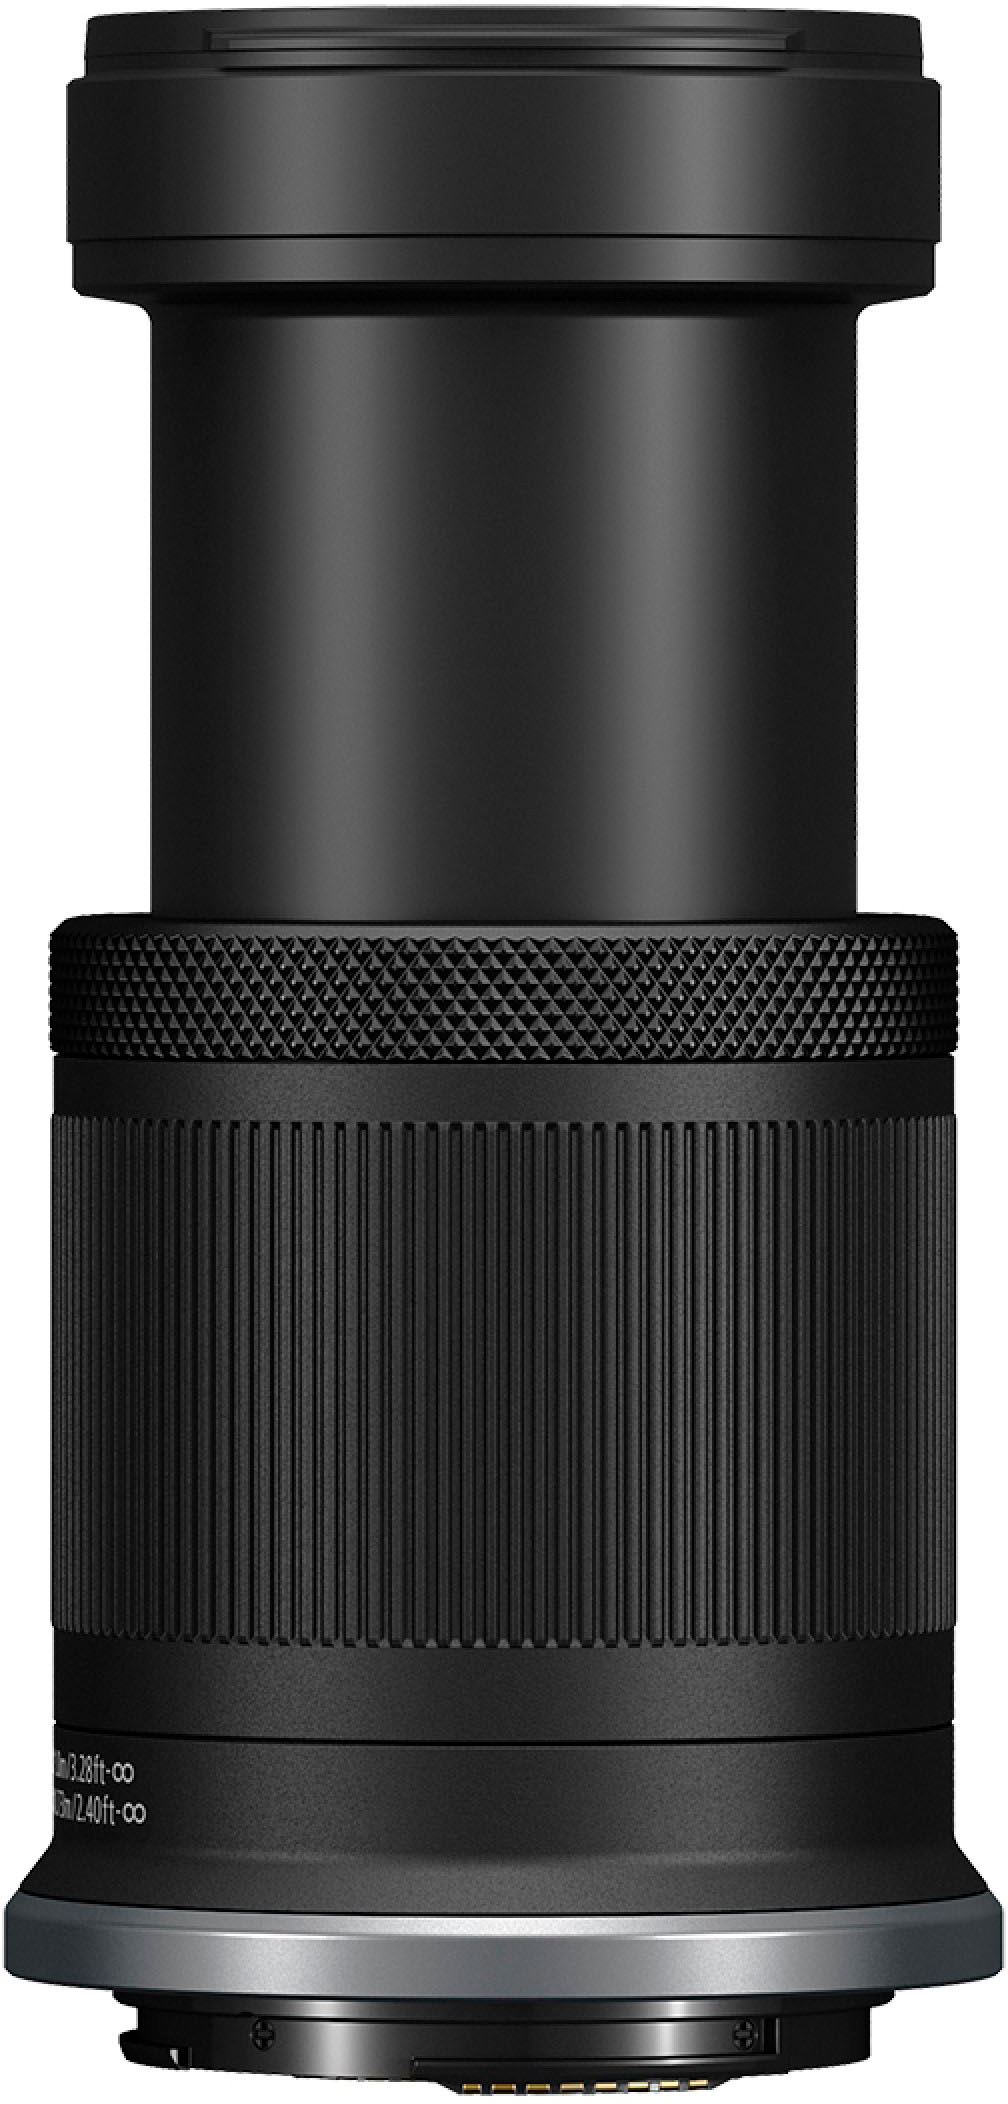 Left View: Canon - EF 500mm f/4L IS II USM Super Telephoto Lens for Most EOS SLR Cameras - White